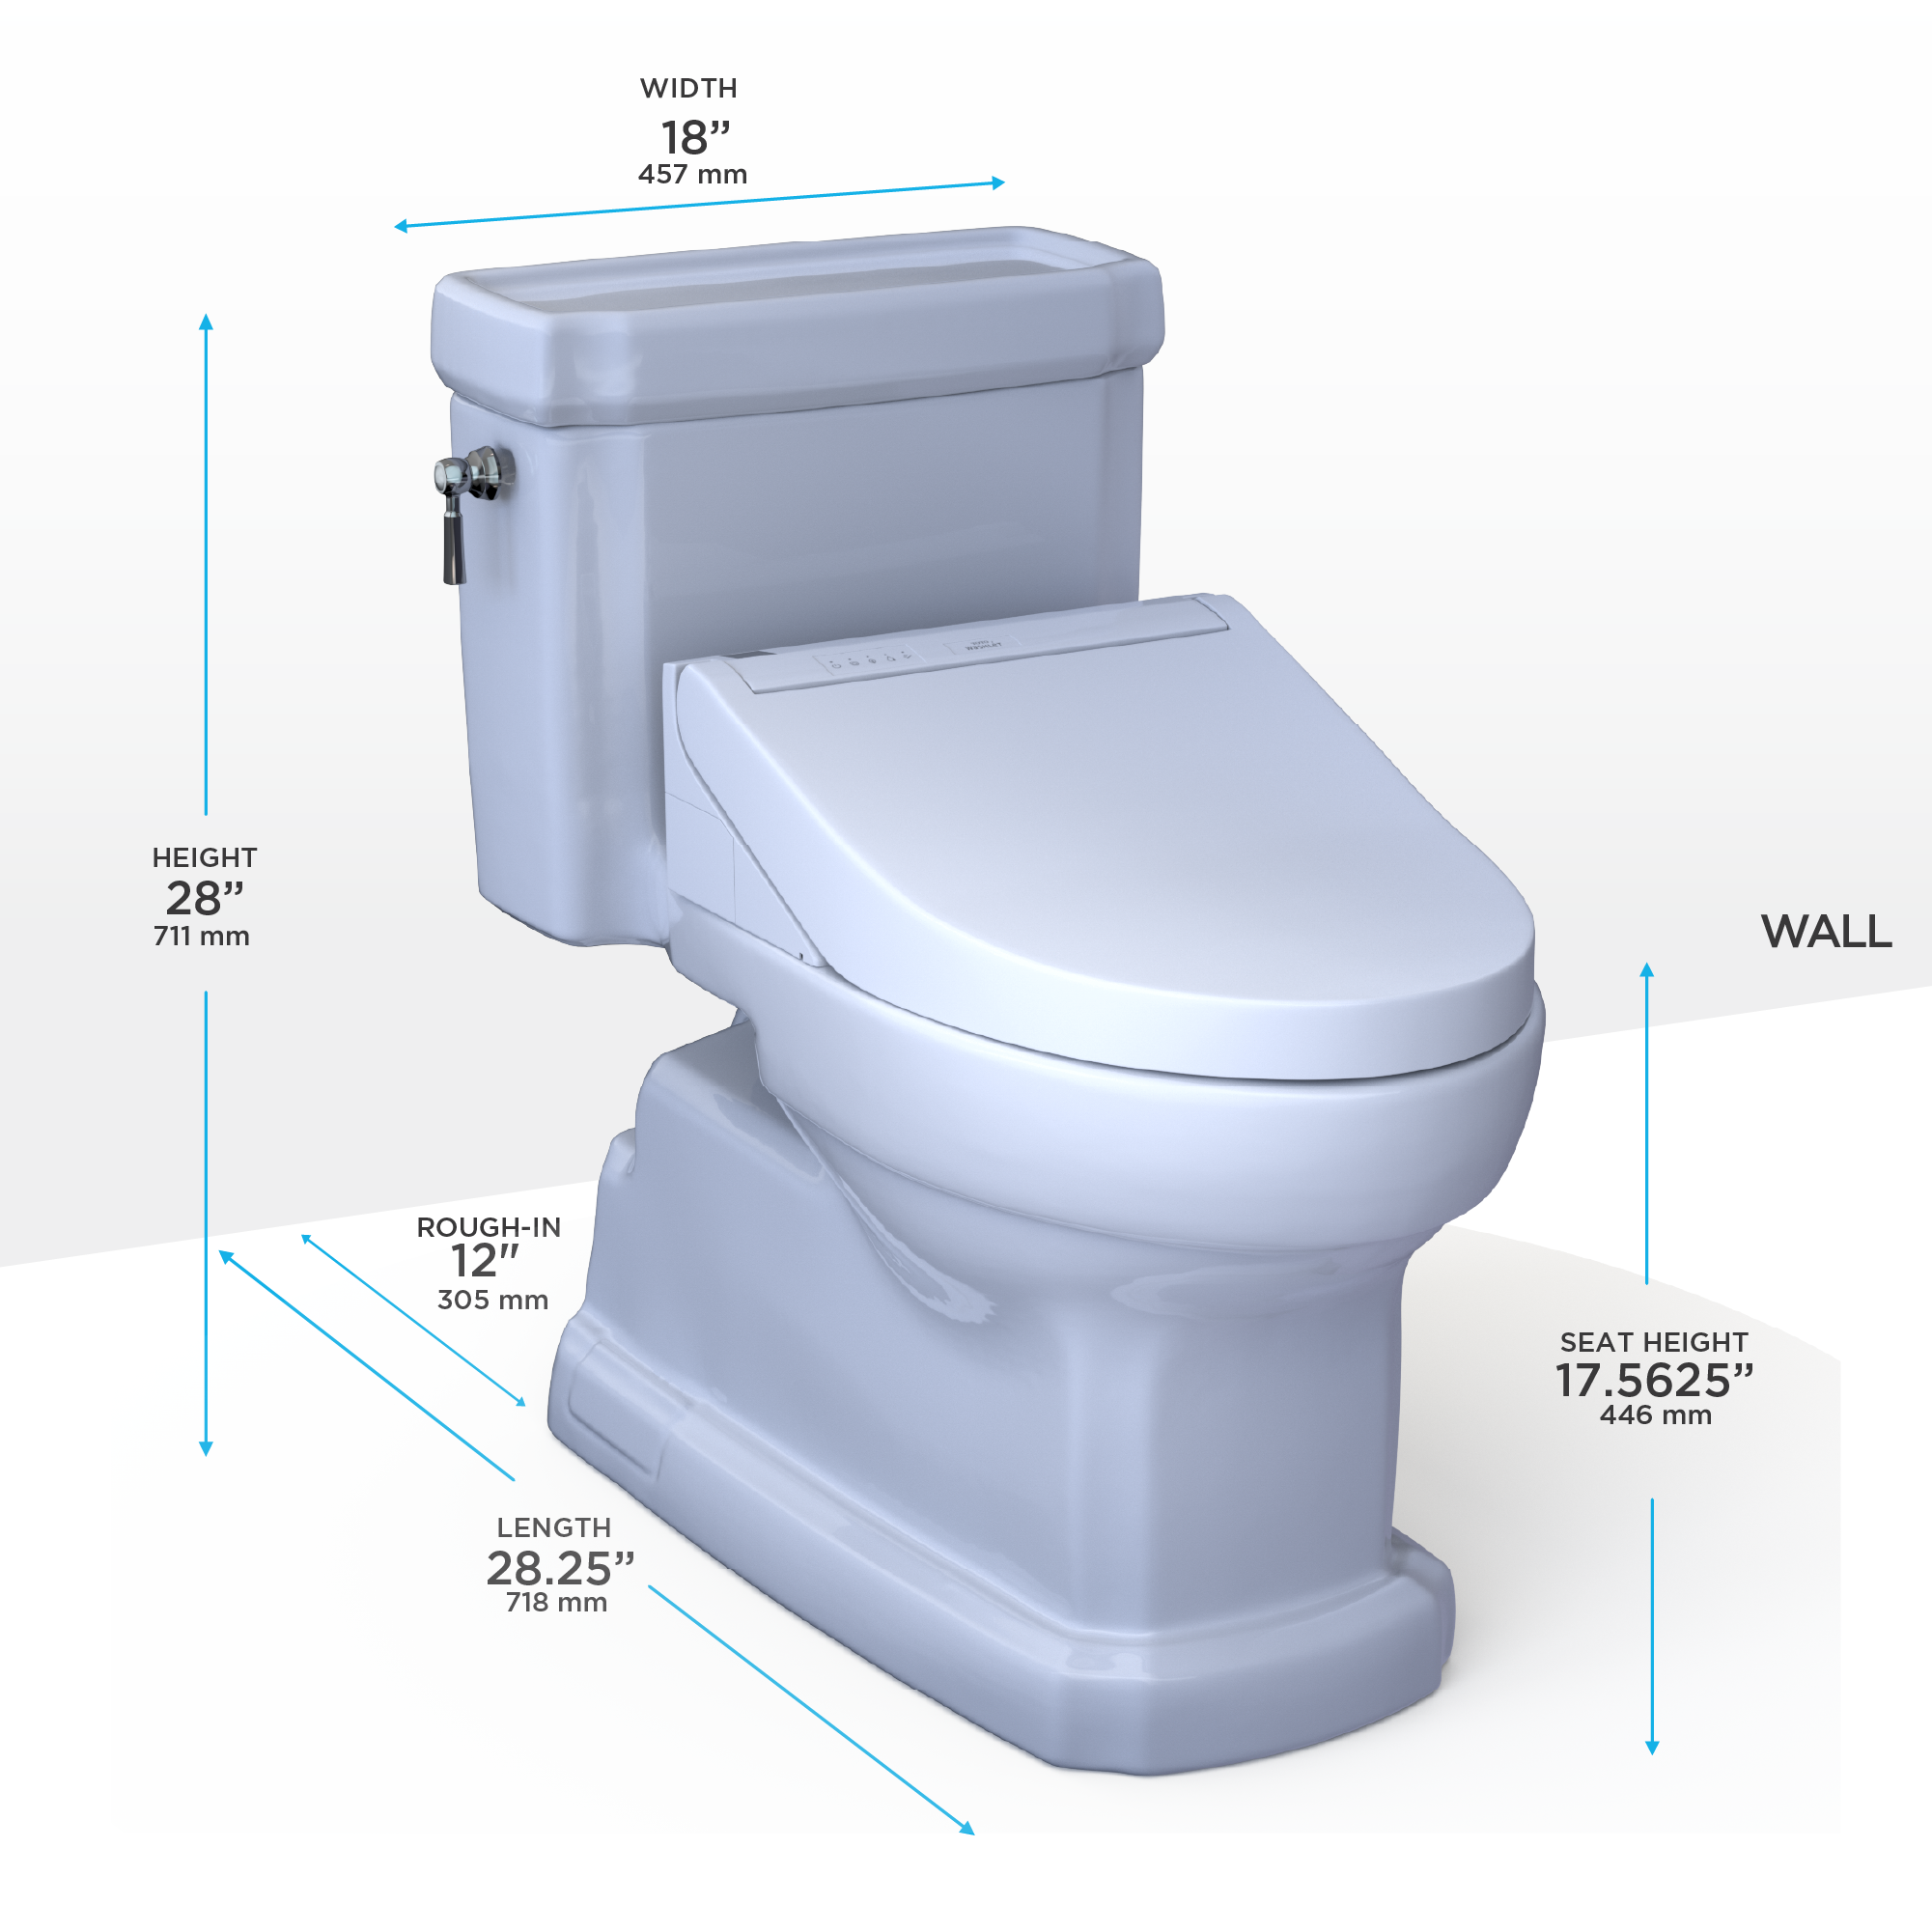 TOTO WASHLET+ Eco Guinevere Elongated 1.28 GPF Universal Height Toilet with C5 Bidet Seat, Cotton White - MW9743084CEFG#01